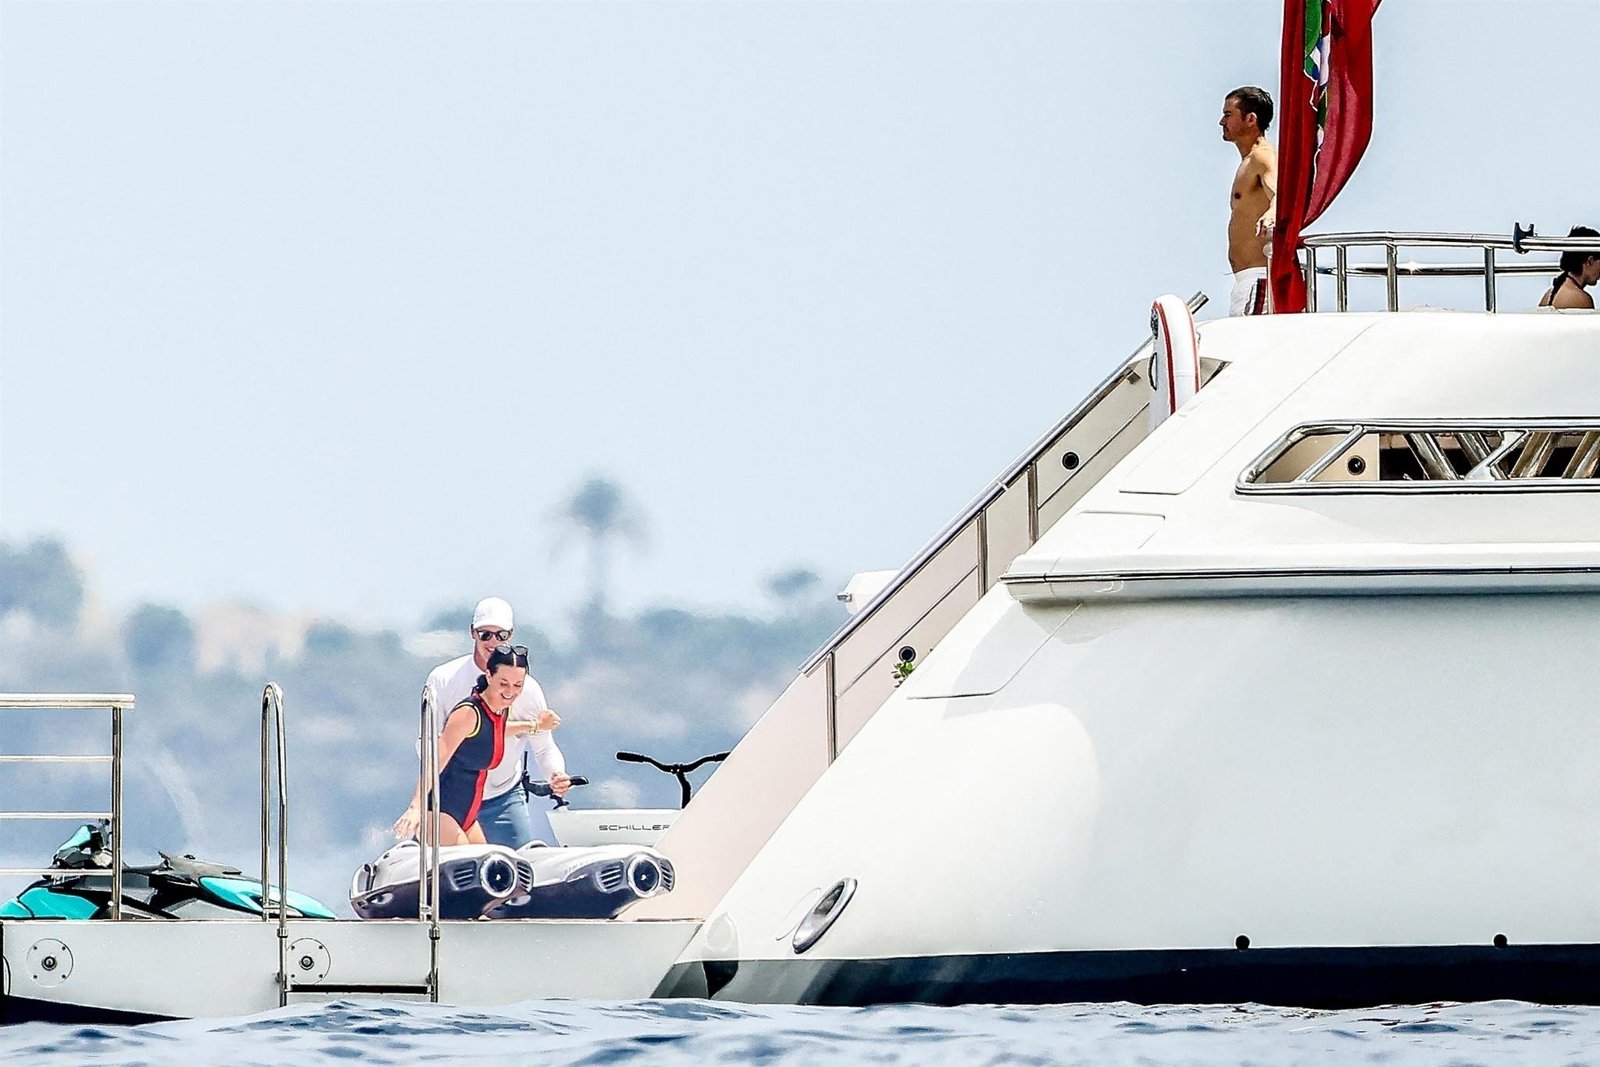 Orlando Bloom and Katy Perry on a yacht